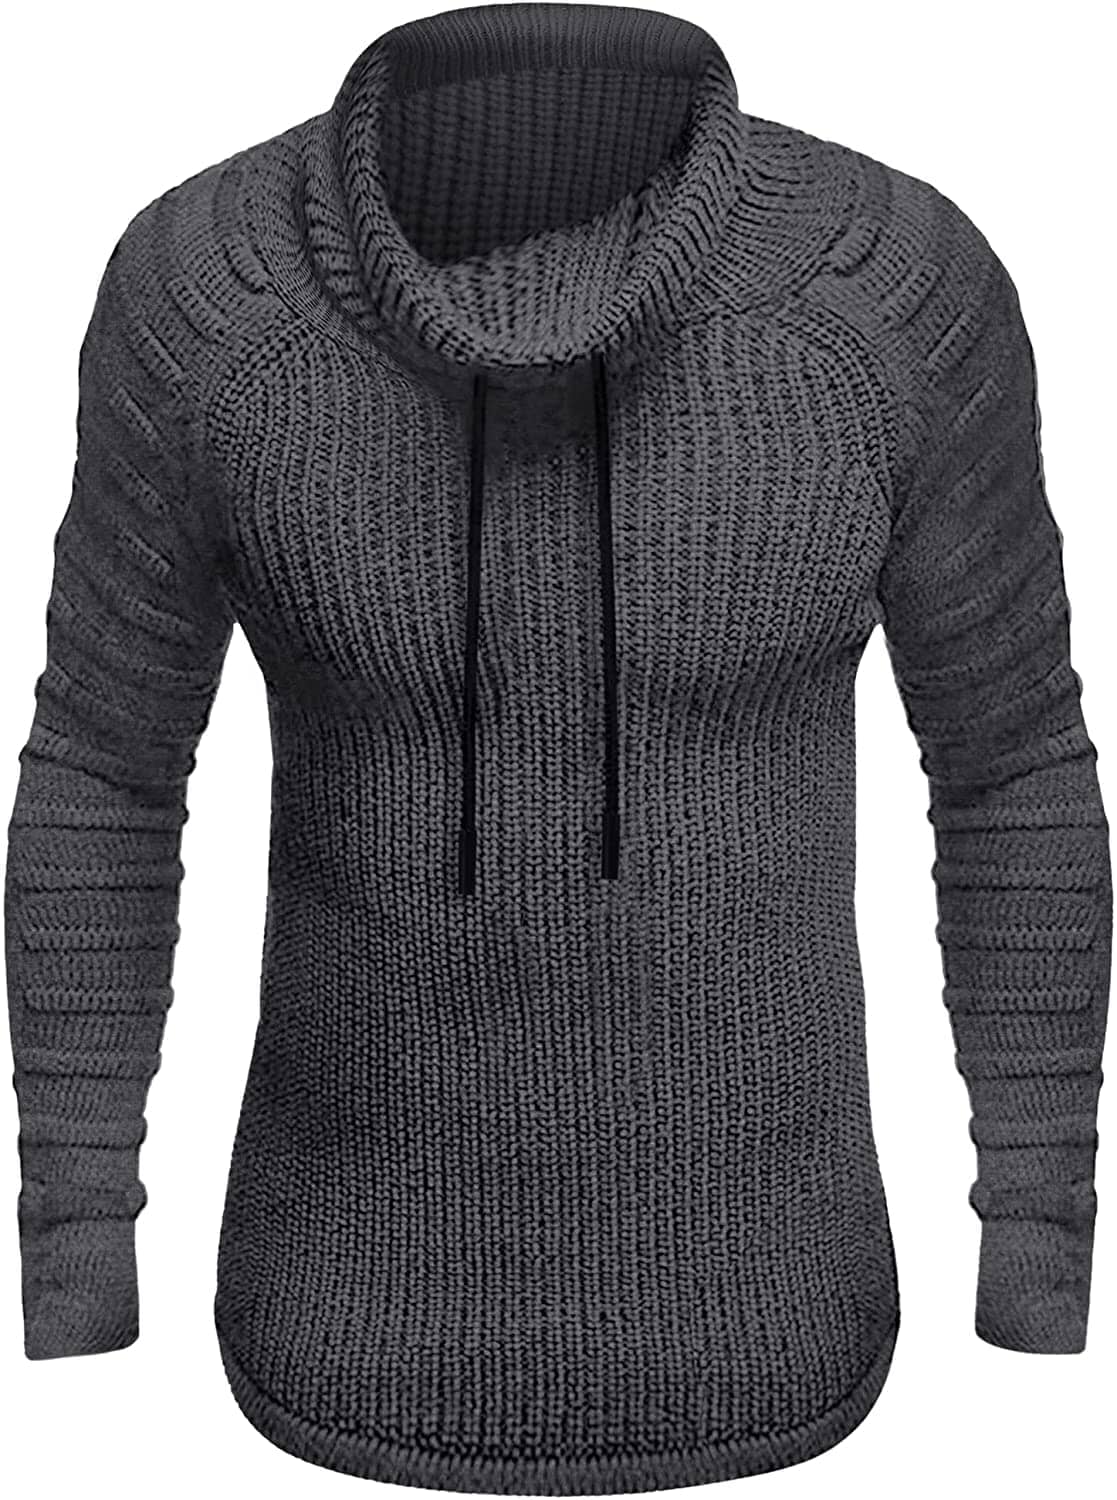 Coofandy Knitted Turtleneck Sweater (US Only) Fashion Hoodies & Sweatshirts COOFANDY Store Grey Small 